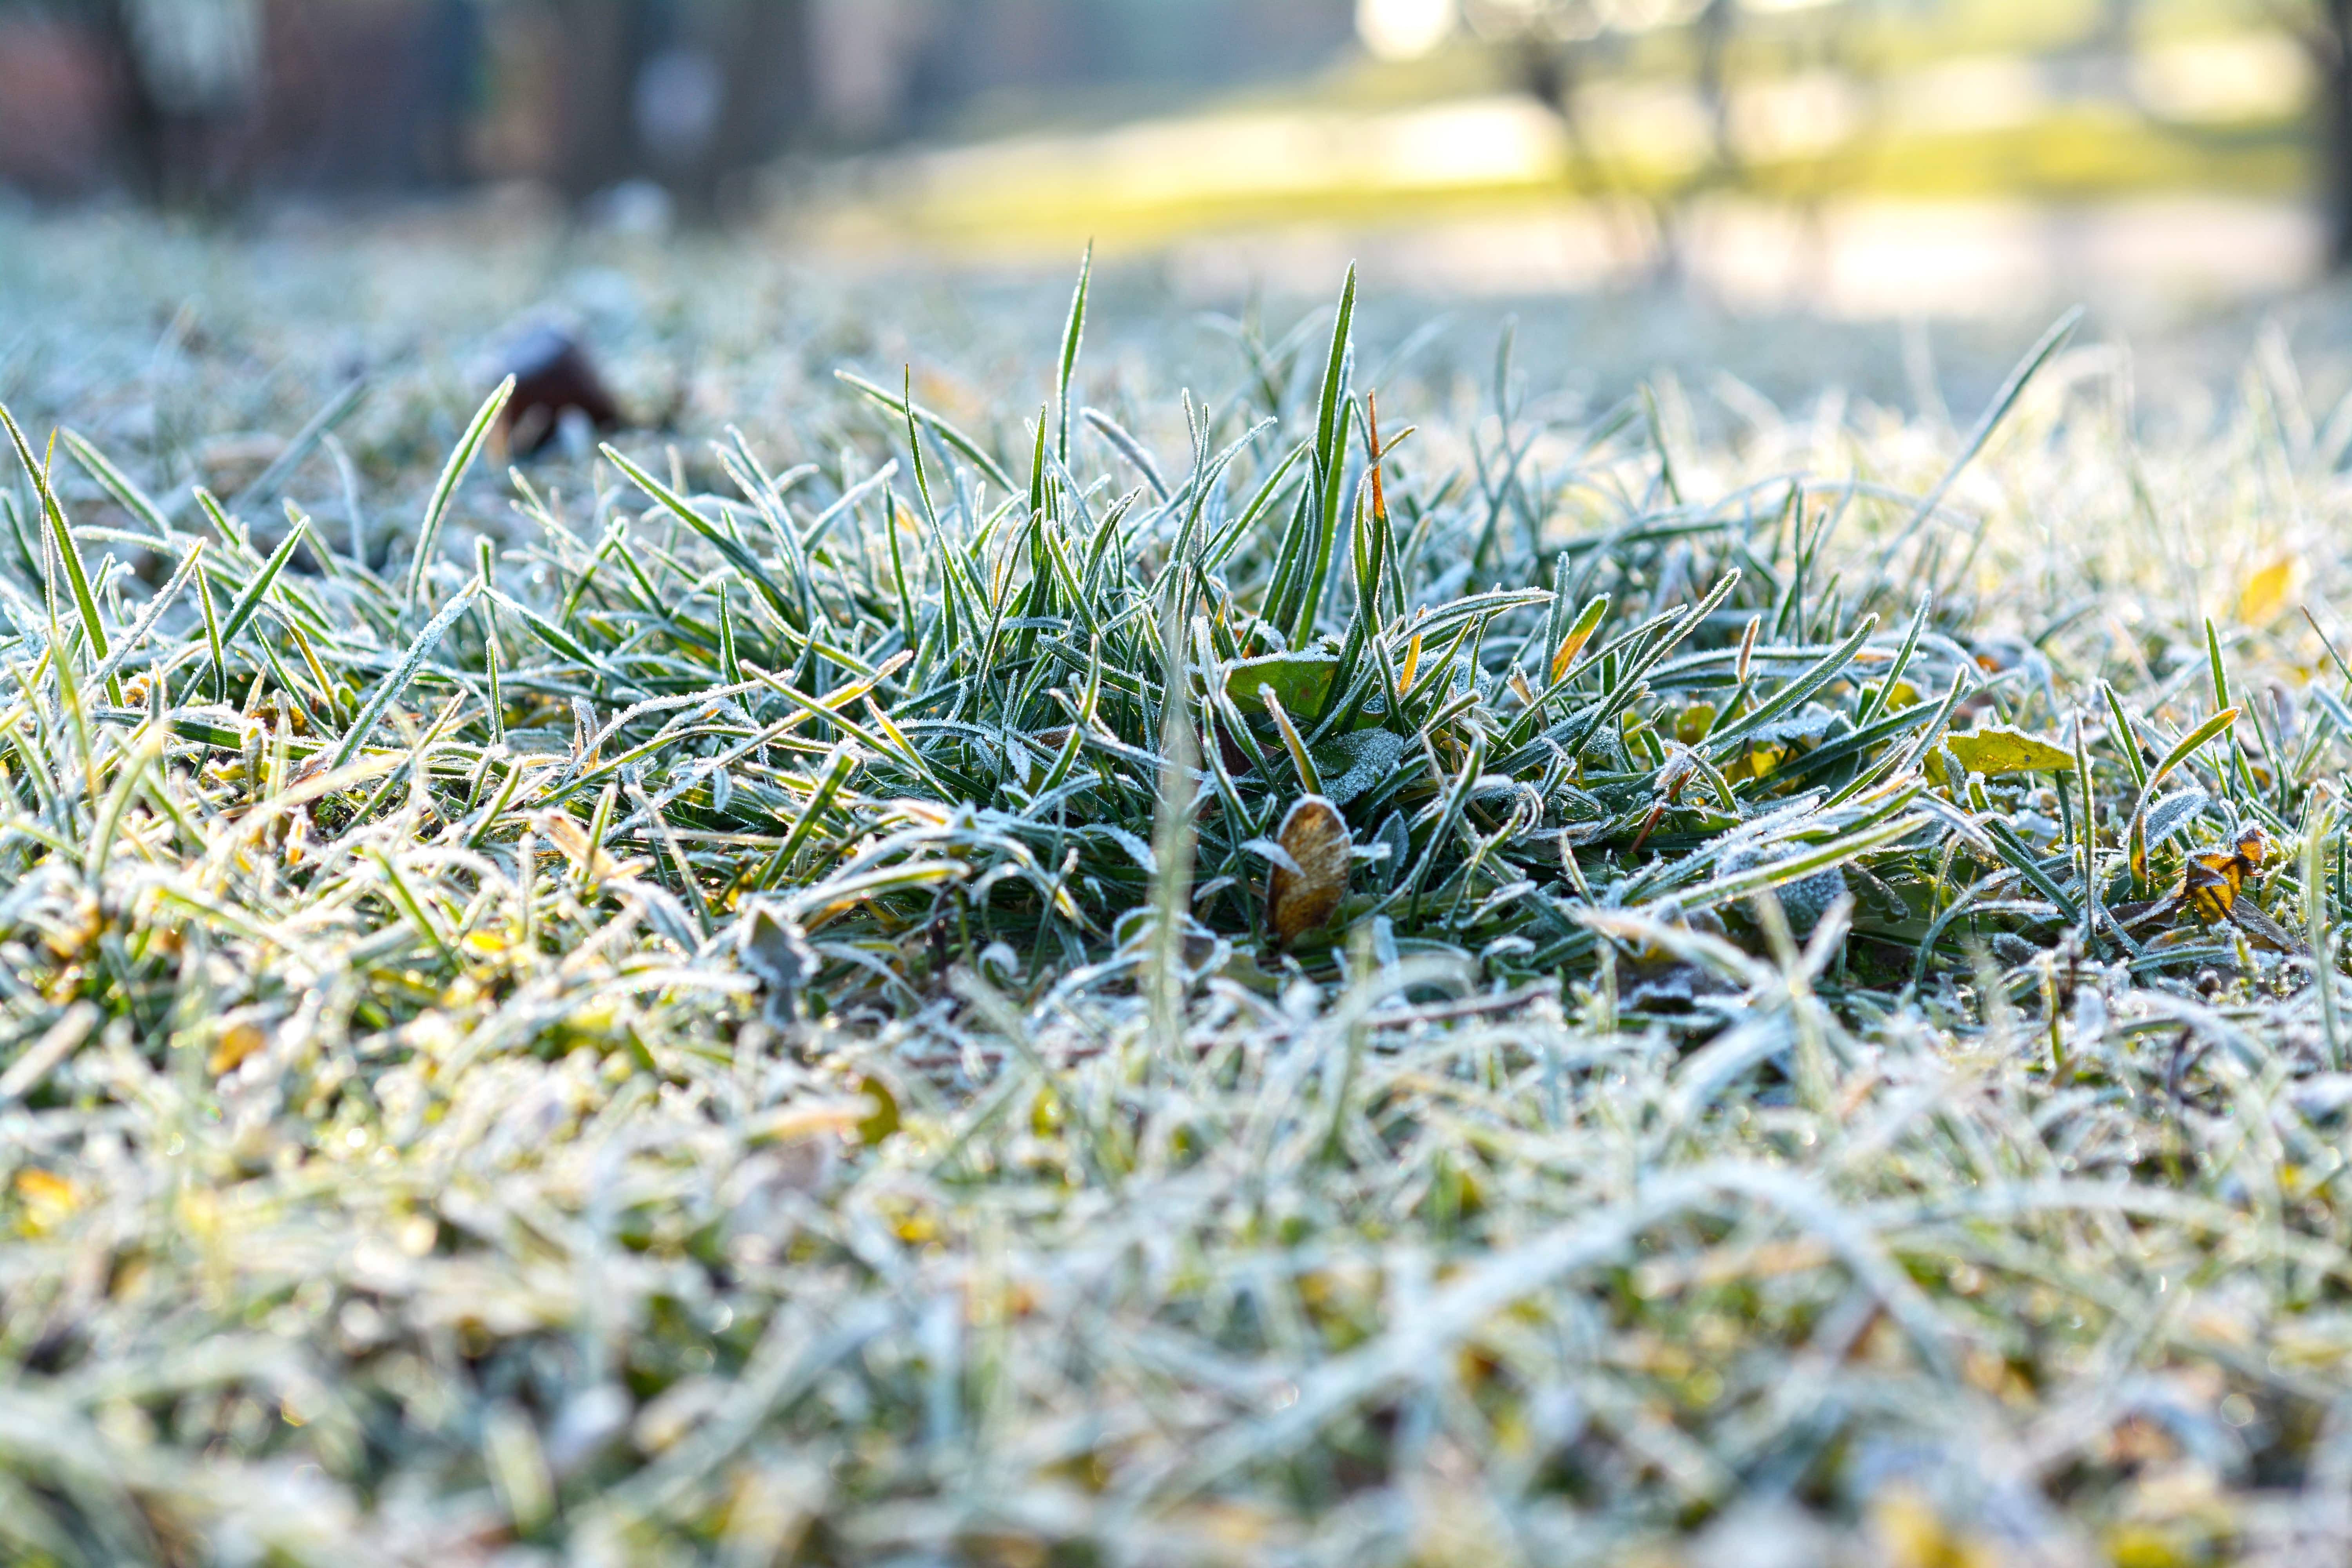 frost heaving is a common cause of water leakage.